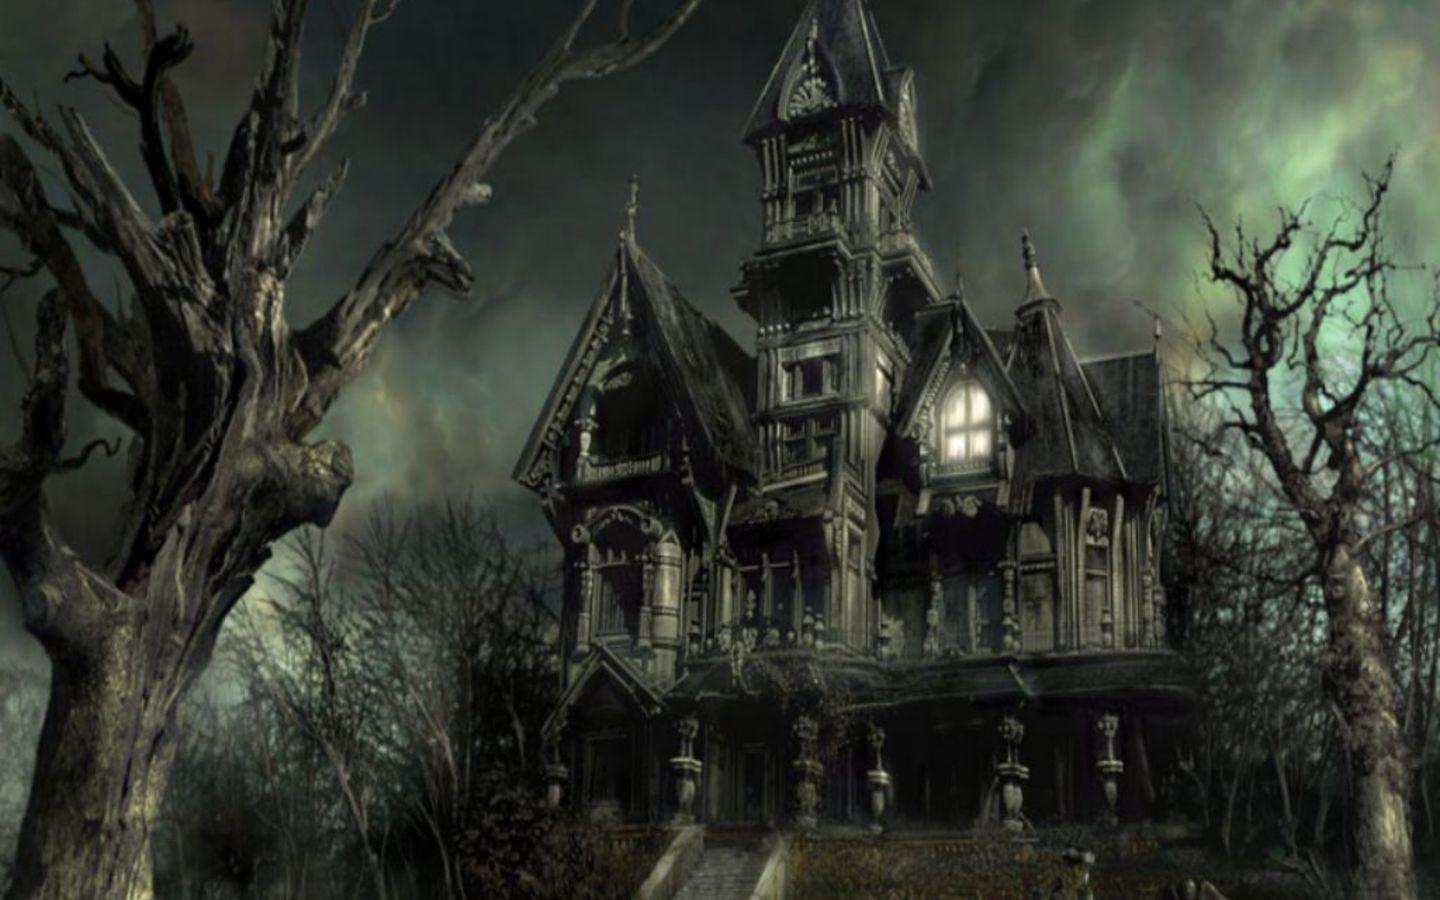 Horror Ghost Houses wallpaper HQ image size